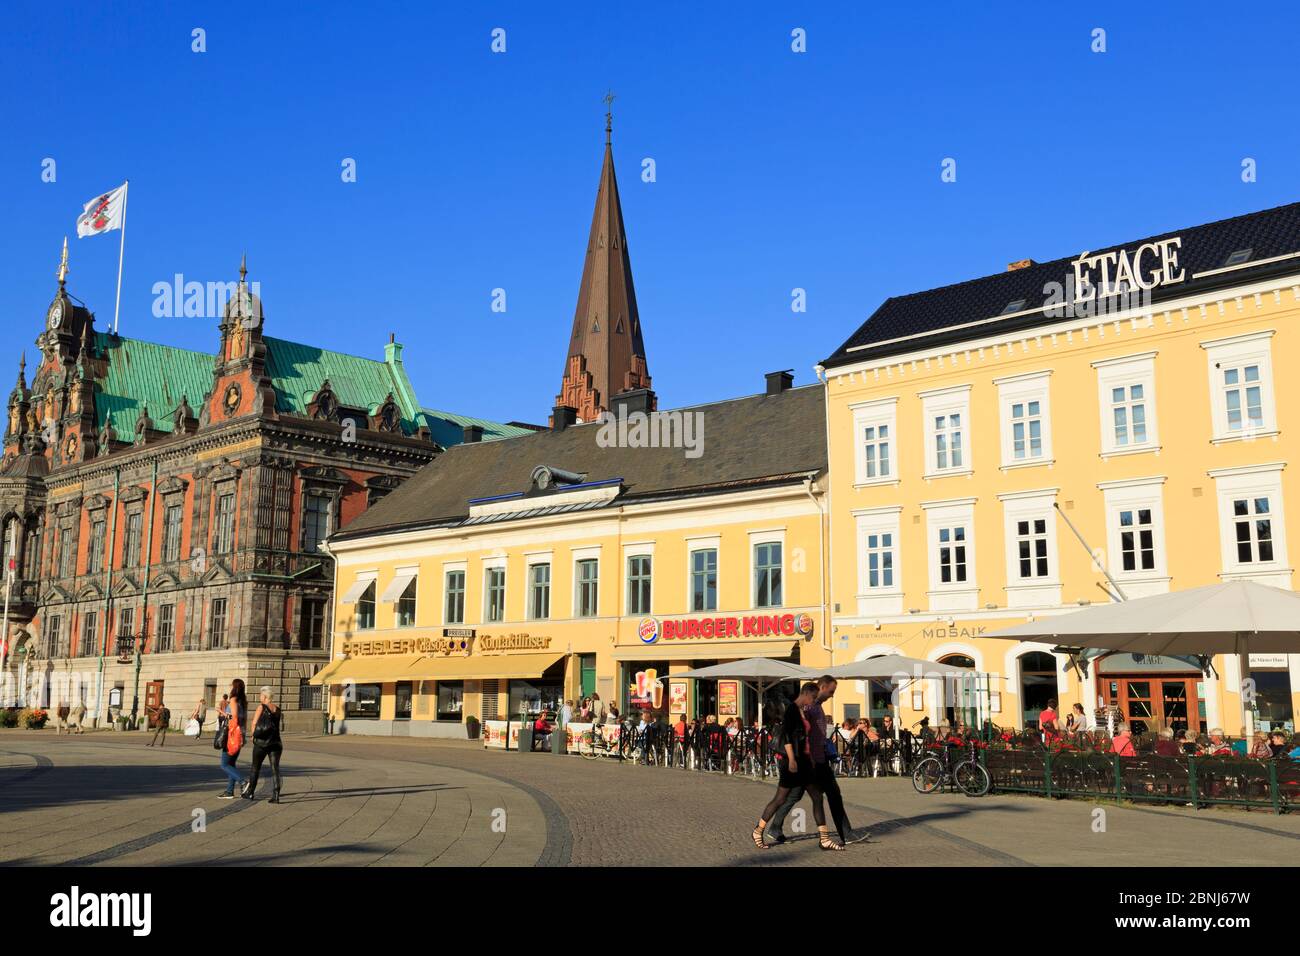 Town Hall in Stortorget Square, Old Town, Malmo, Skane County, Sweden, Scandinavia, Europe Stock Photo